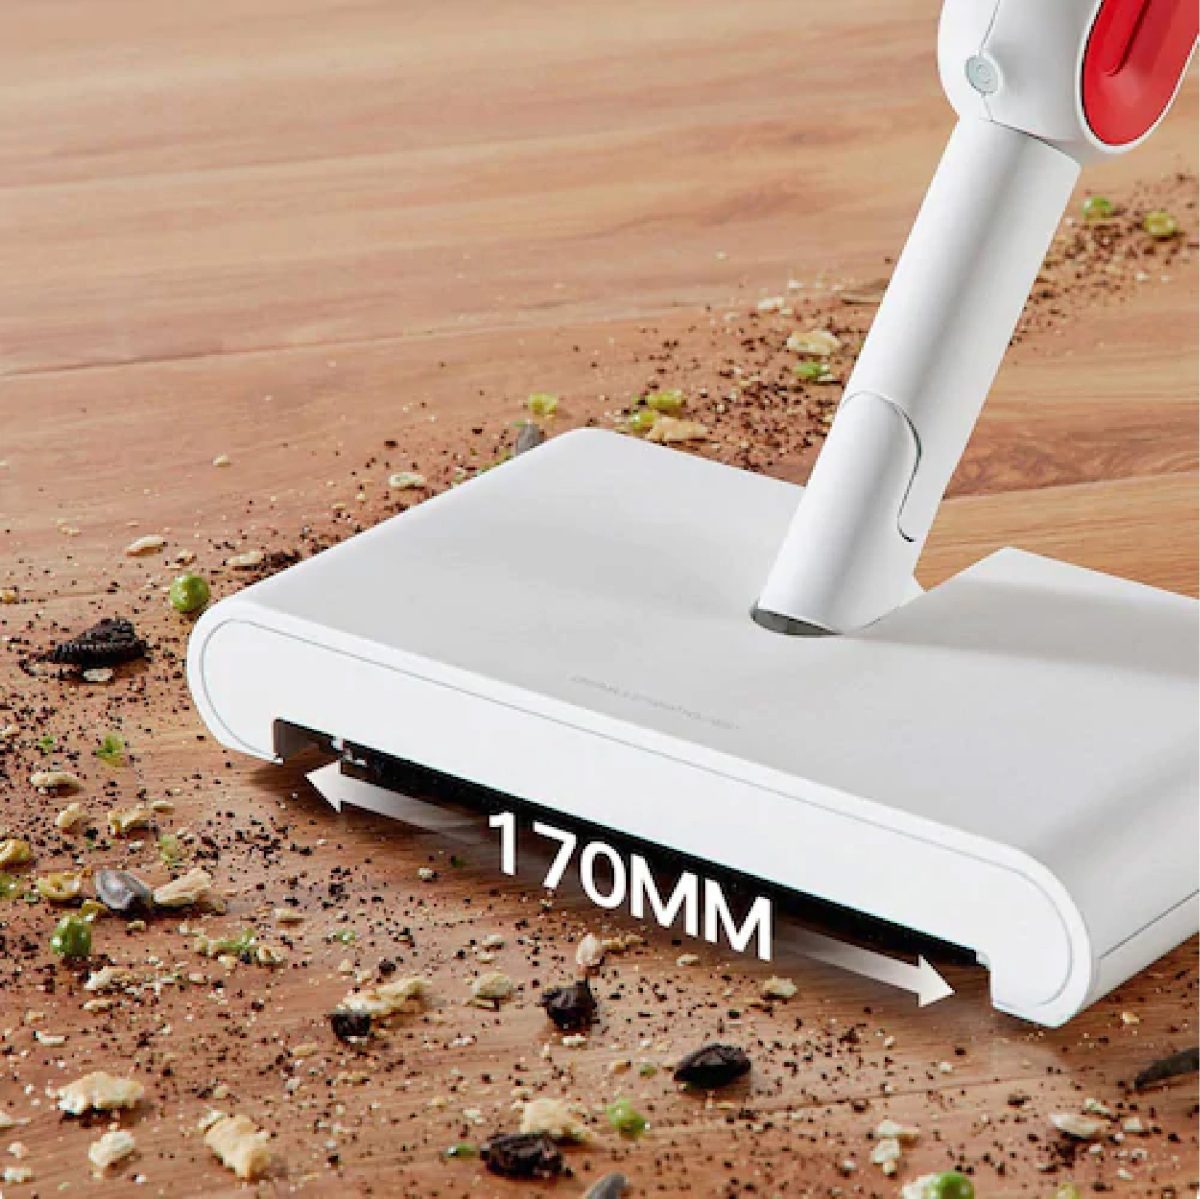 Delmar 05 Xiaomi &Lt;H1&Gt;Deerma Dem-Tb900 Sweep Mop With Sweeping / Cleaning Function&Lt;/H1&Gt; Easy To Operate, Easy To Push, Long-Distance Spray Can Make The Ground Slightly Damp, High Cleaning Efficiency. Front Roller Brush Spiral Machine, I.e. Pushed Forward Rotation Can Drive The Roller Brush, The Floor Dust Rubbish Swept Into The Dust Box, Dust And No Sweep Net. Soft Bristles Slender, Deep Ground Slit Sweep Out Dust, Clean The Inside And Outside. Deerma Dem-Tb900 Sweep Mop With Sweeping / Cleaning Function